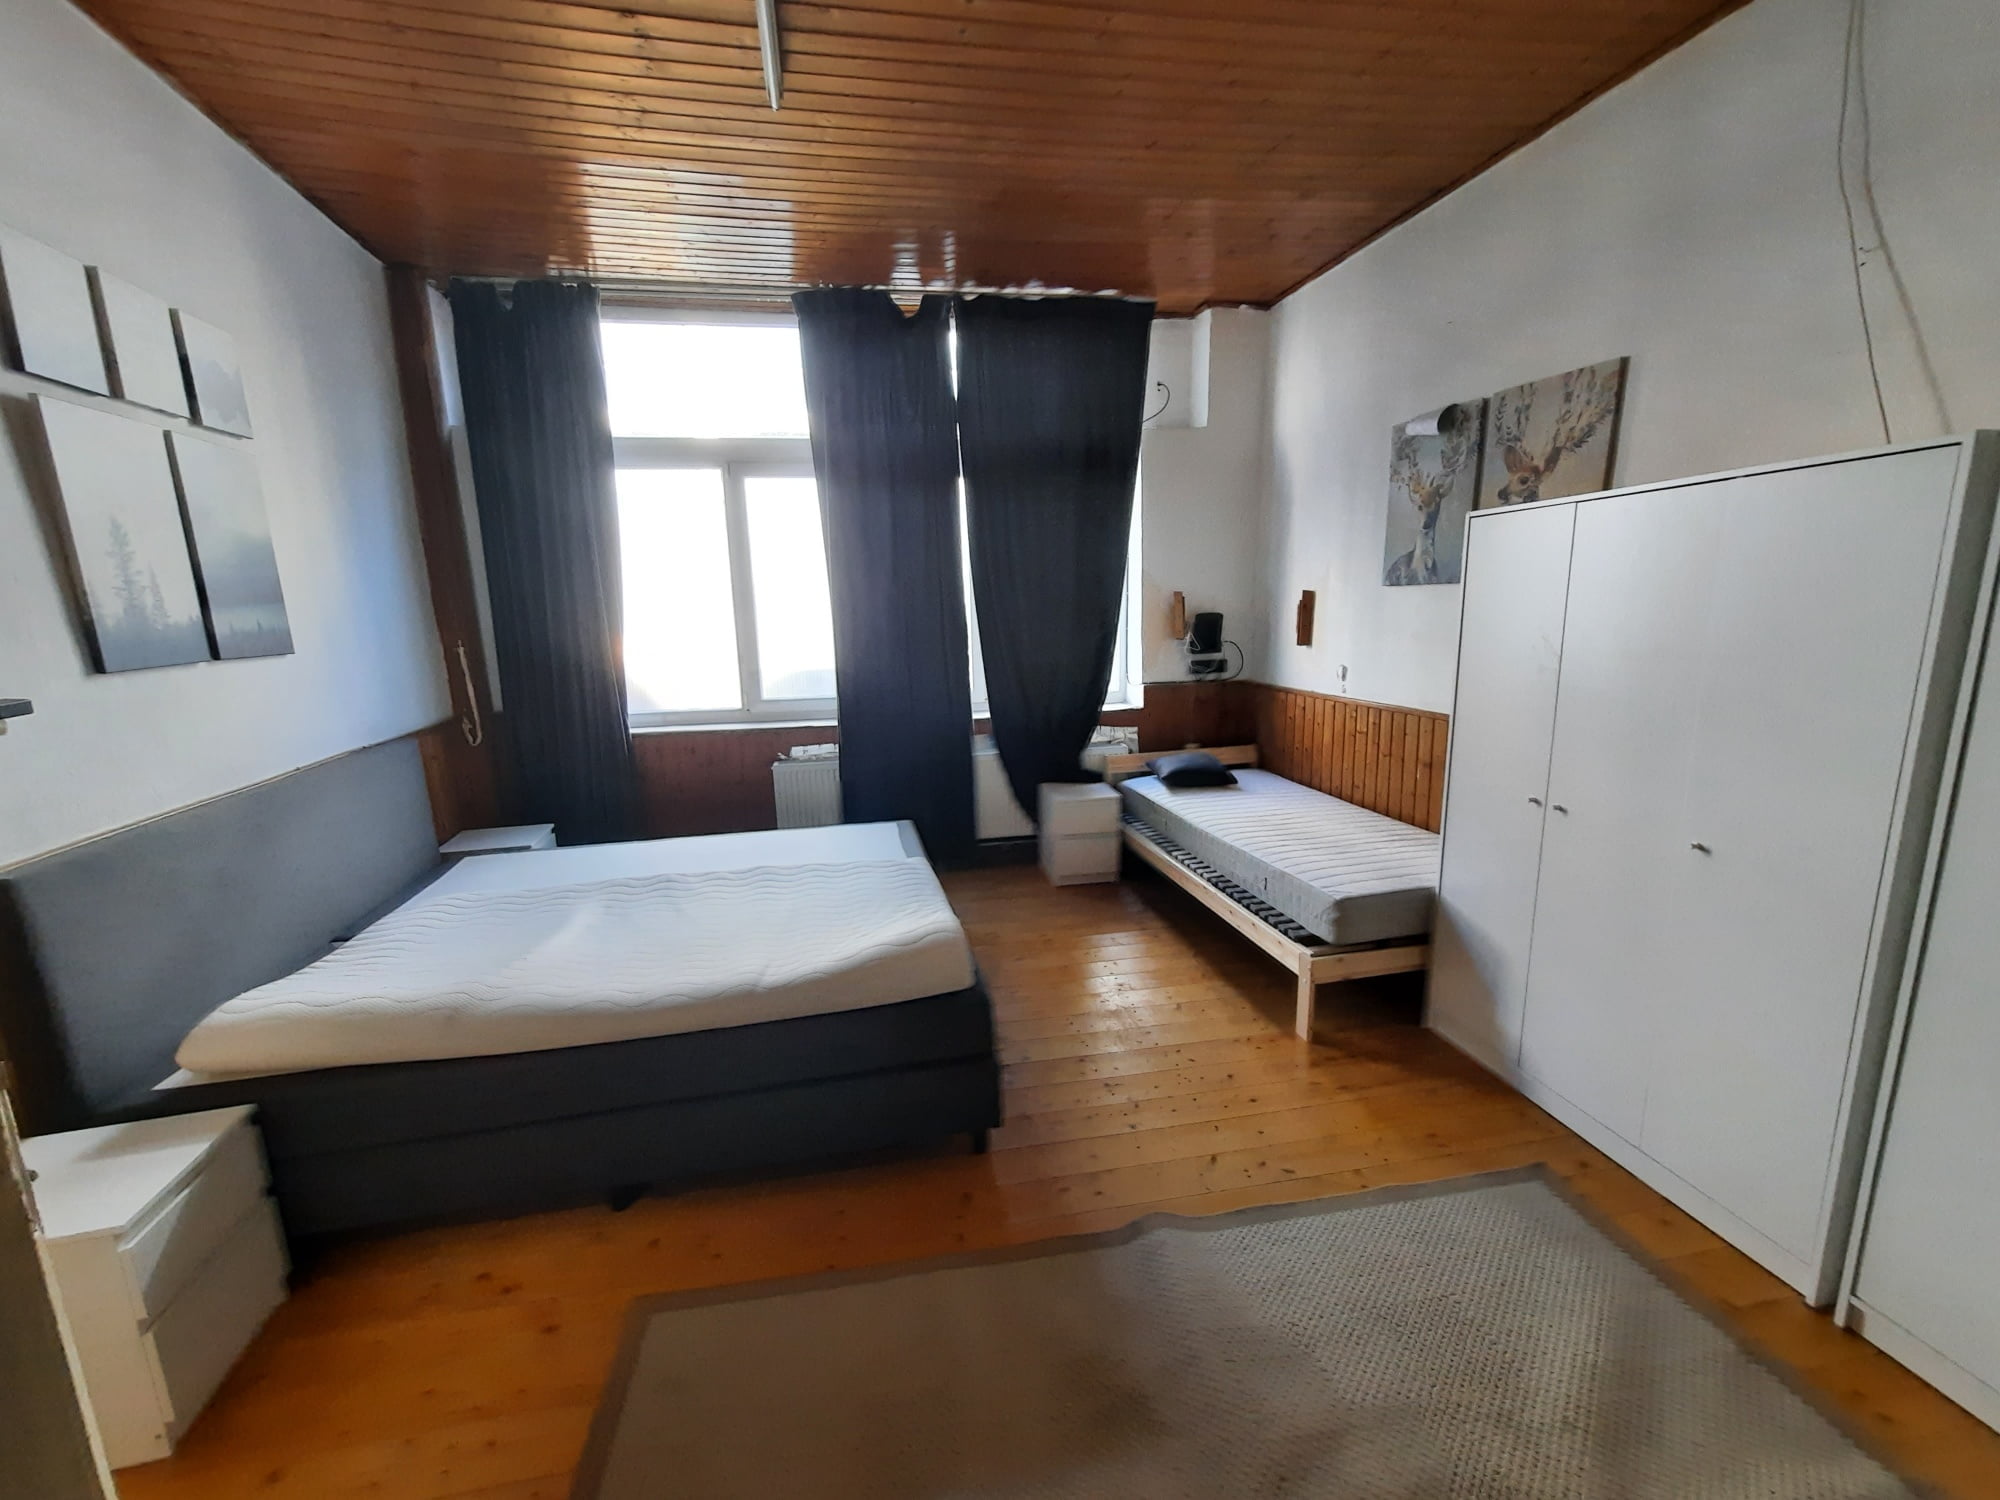 Paleis 2 - Furnished accommodation for rent in Antwerp 1